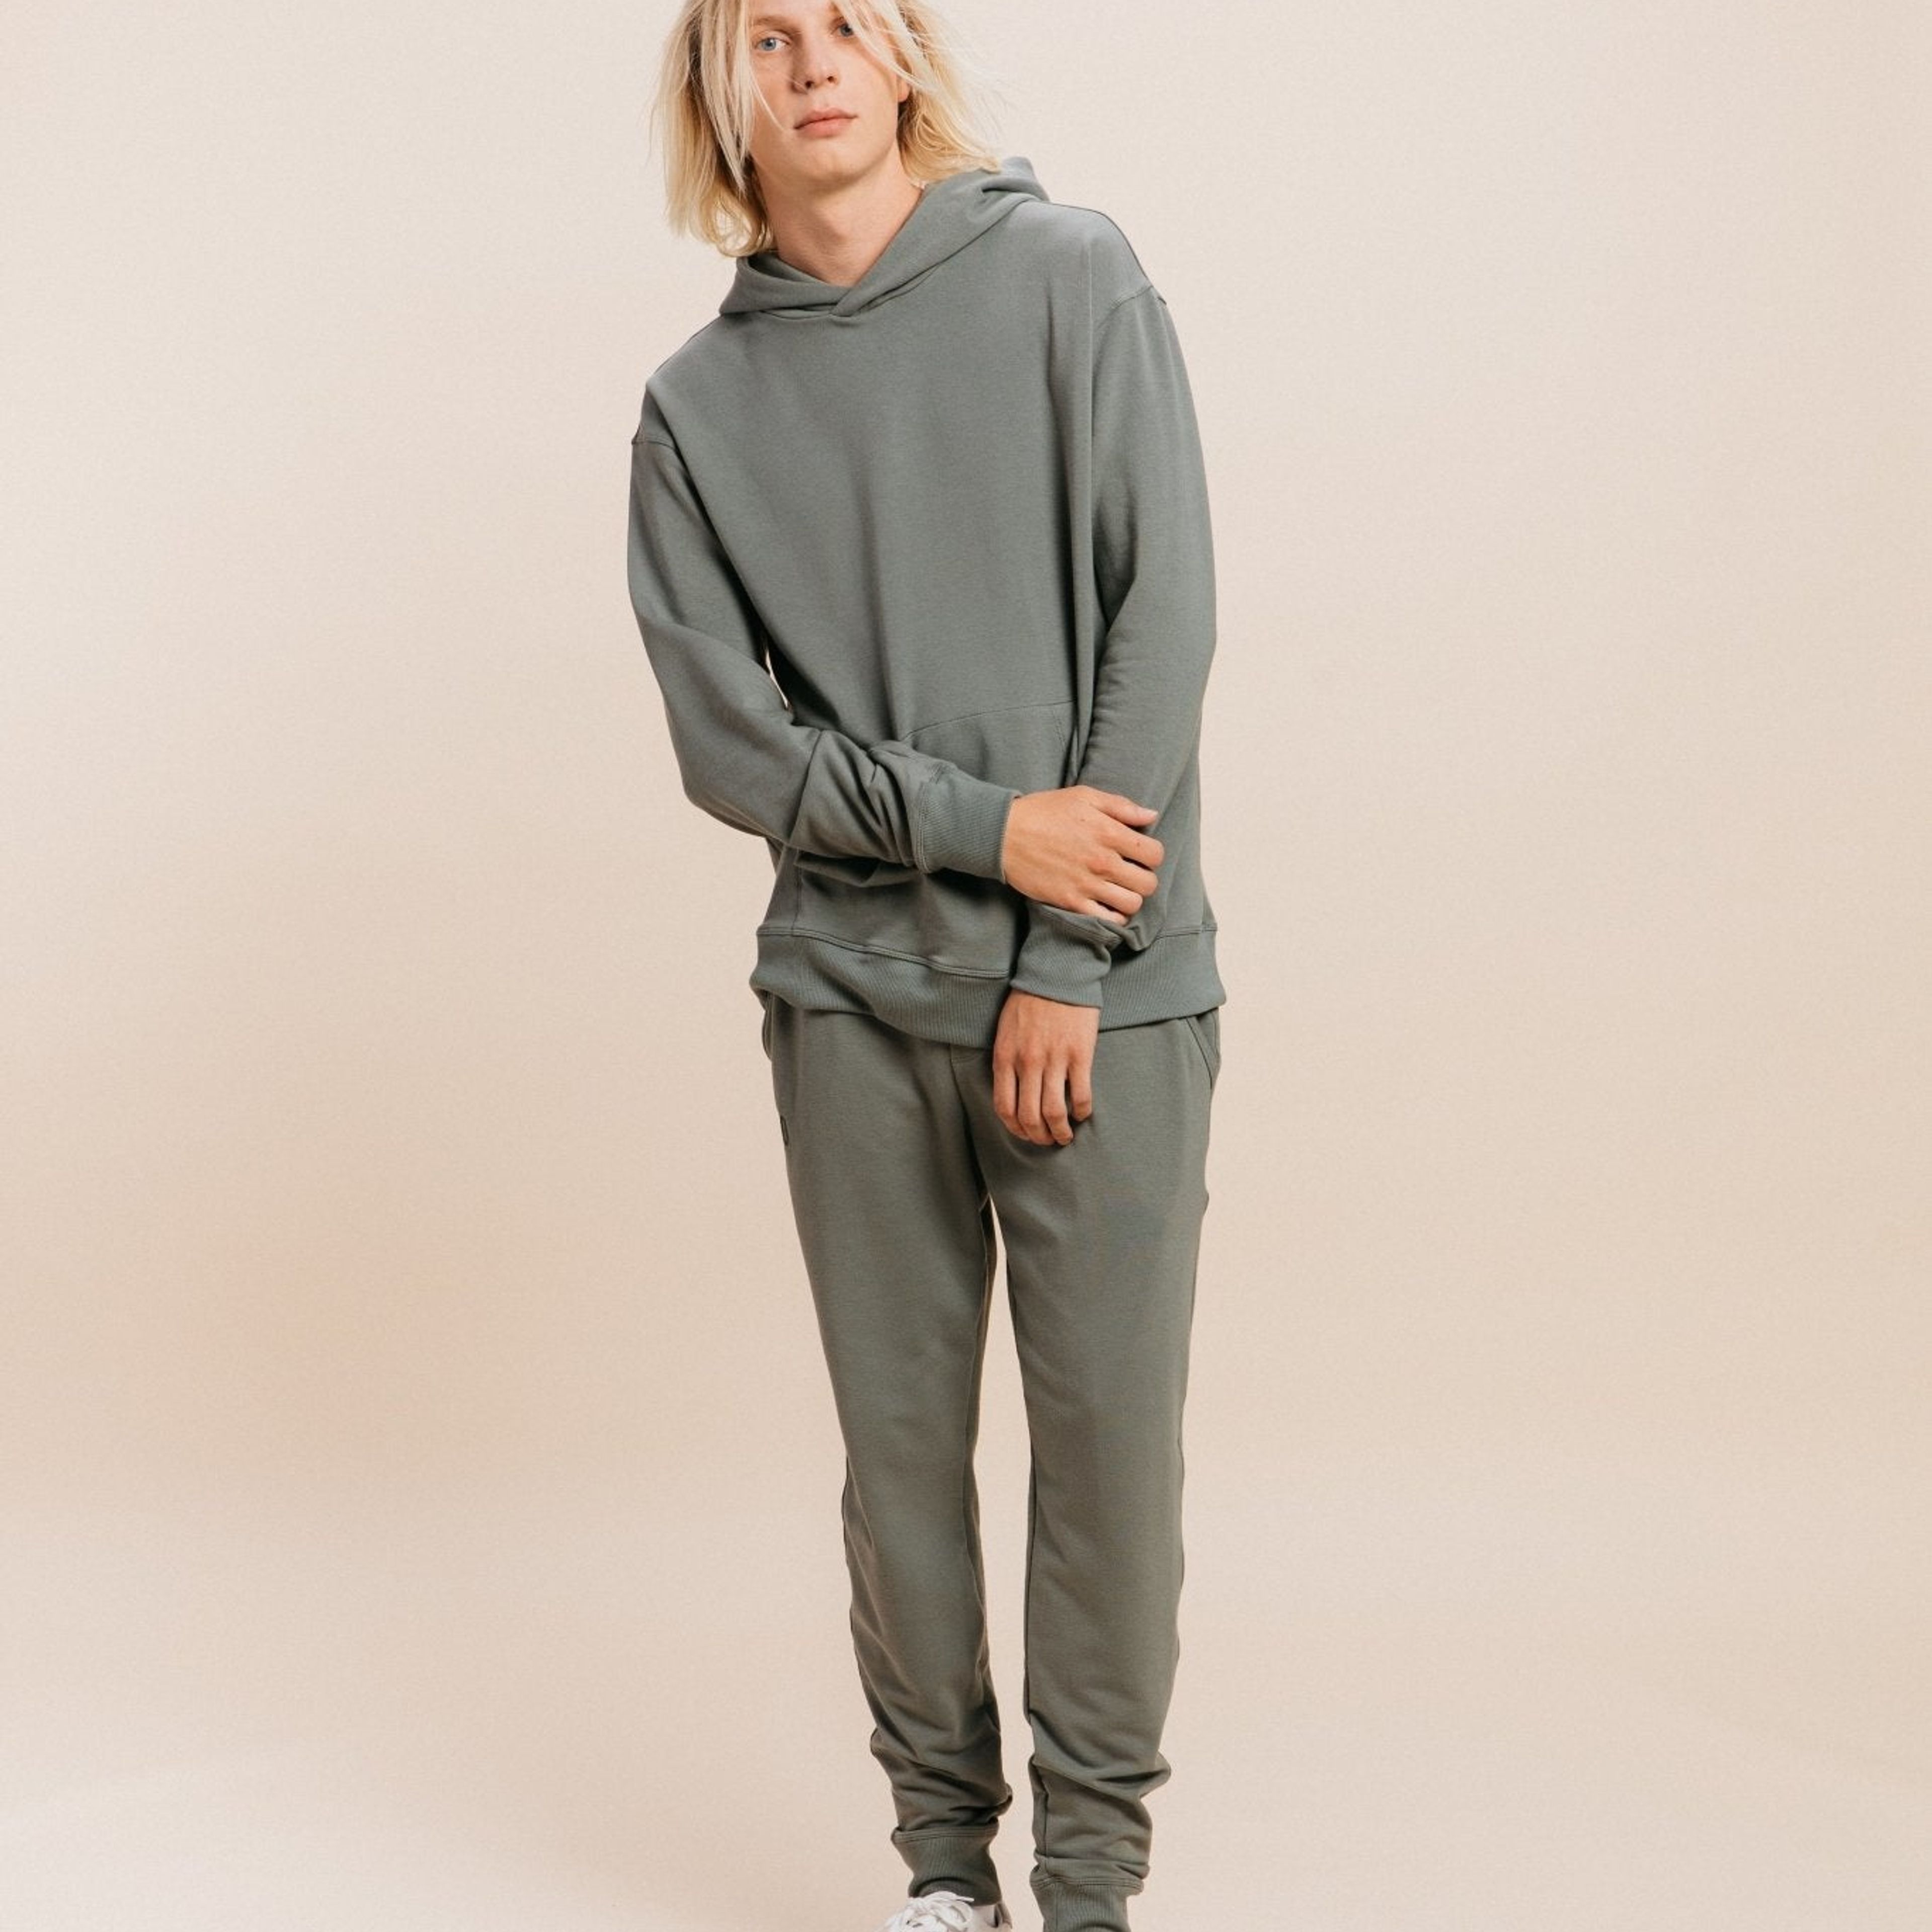 Classic SoftCore Jogger in Sage